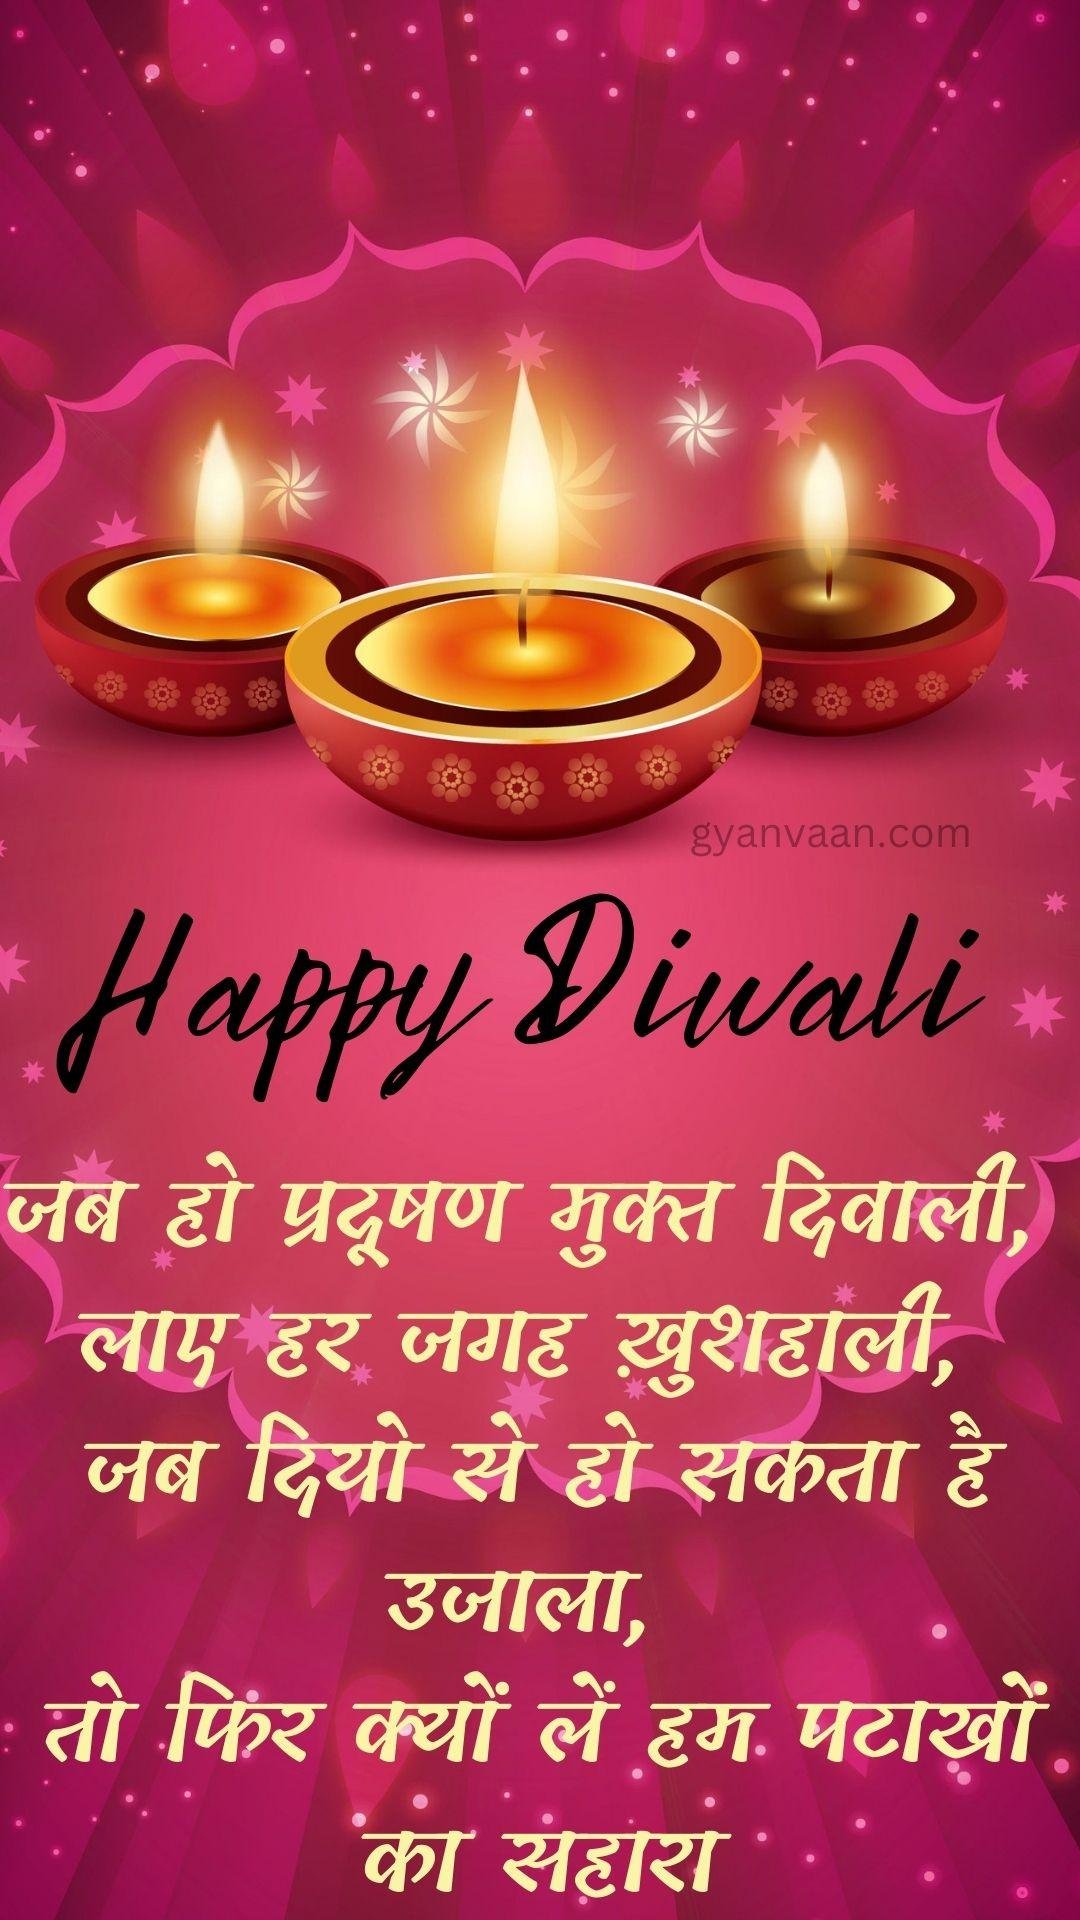 Diwali Quotes In Hindi With Wishes33 - Diwali Quotes In Hindi